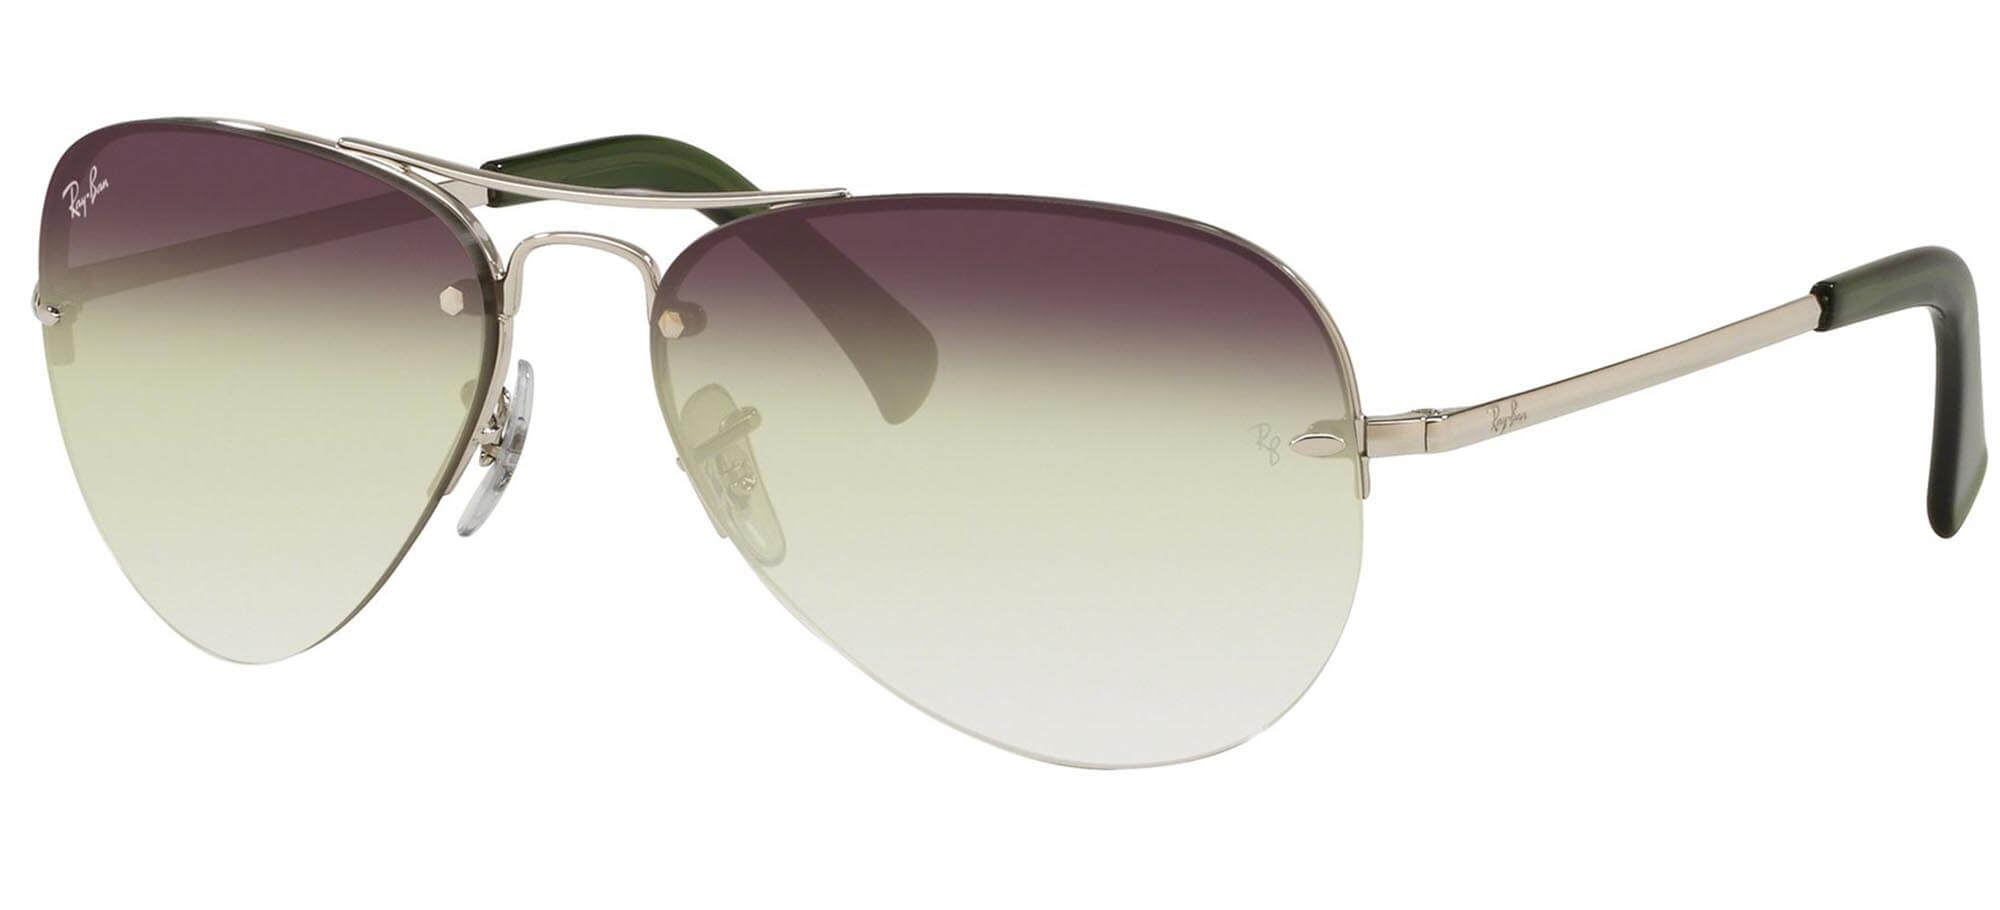 Ray-BanRB 3449Silver/green Shaded (9130/0R)